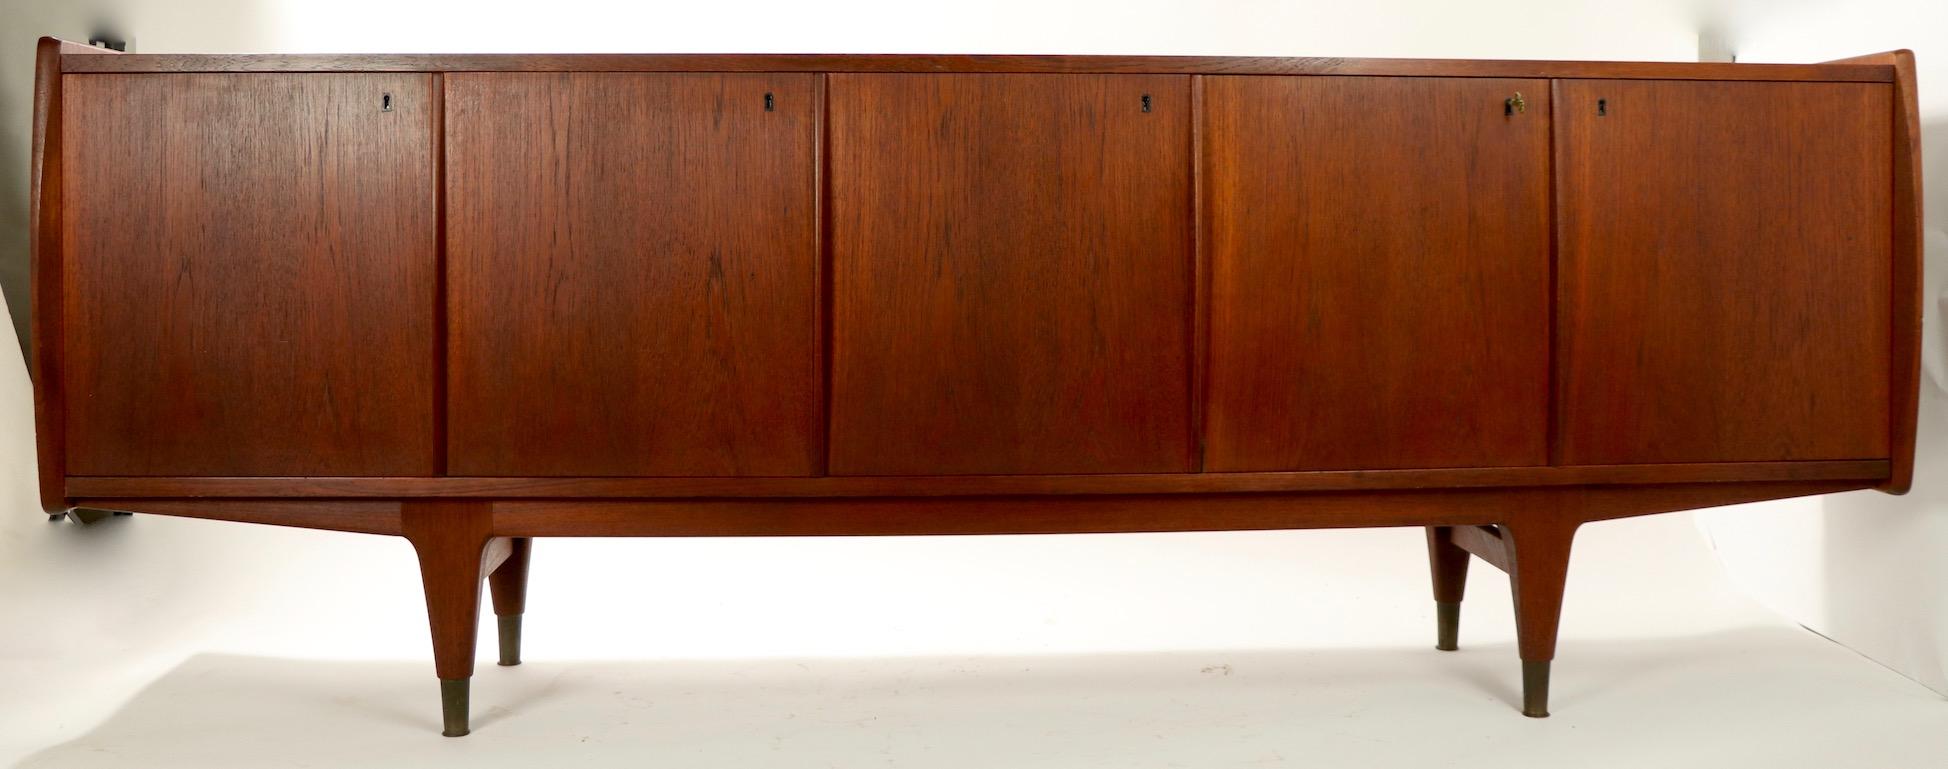 Exceptional Danish modern sideboard credenza of solid teak with four lockable doors, sculpted legs, and brass feet. The doors open to reveal shelved space and spaces with drawers. The case has sculpted sides which extend beyond the doors and top to